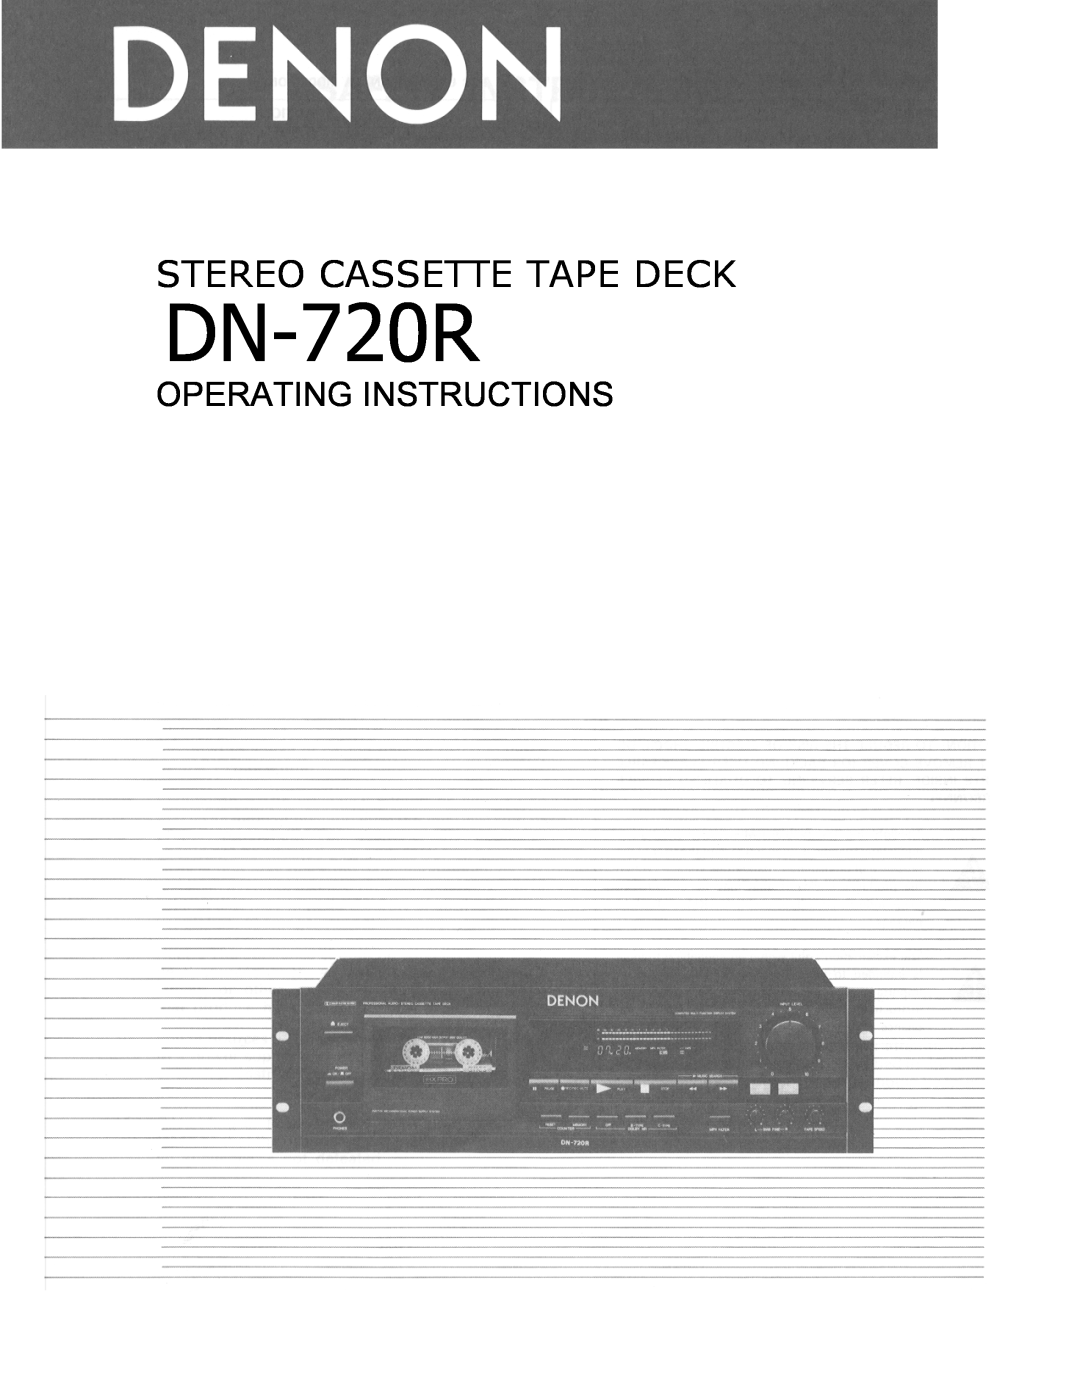 Denon DN-720R operating instructions Stereo Cassette Tape Deck, Operating Instructions 